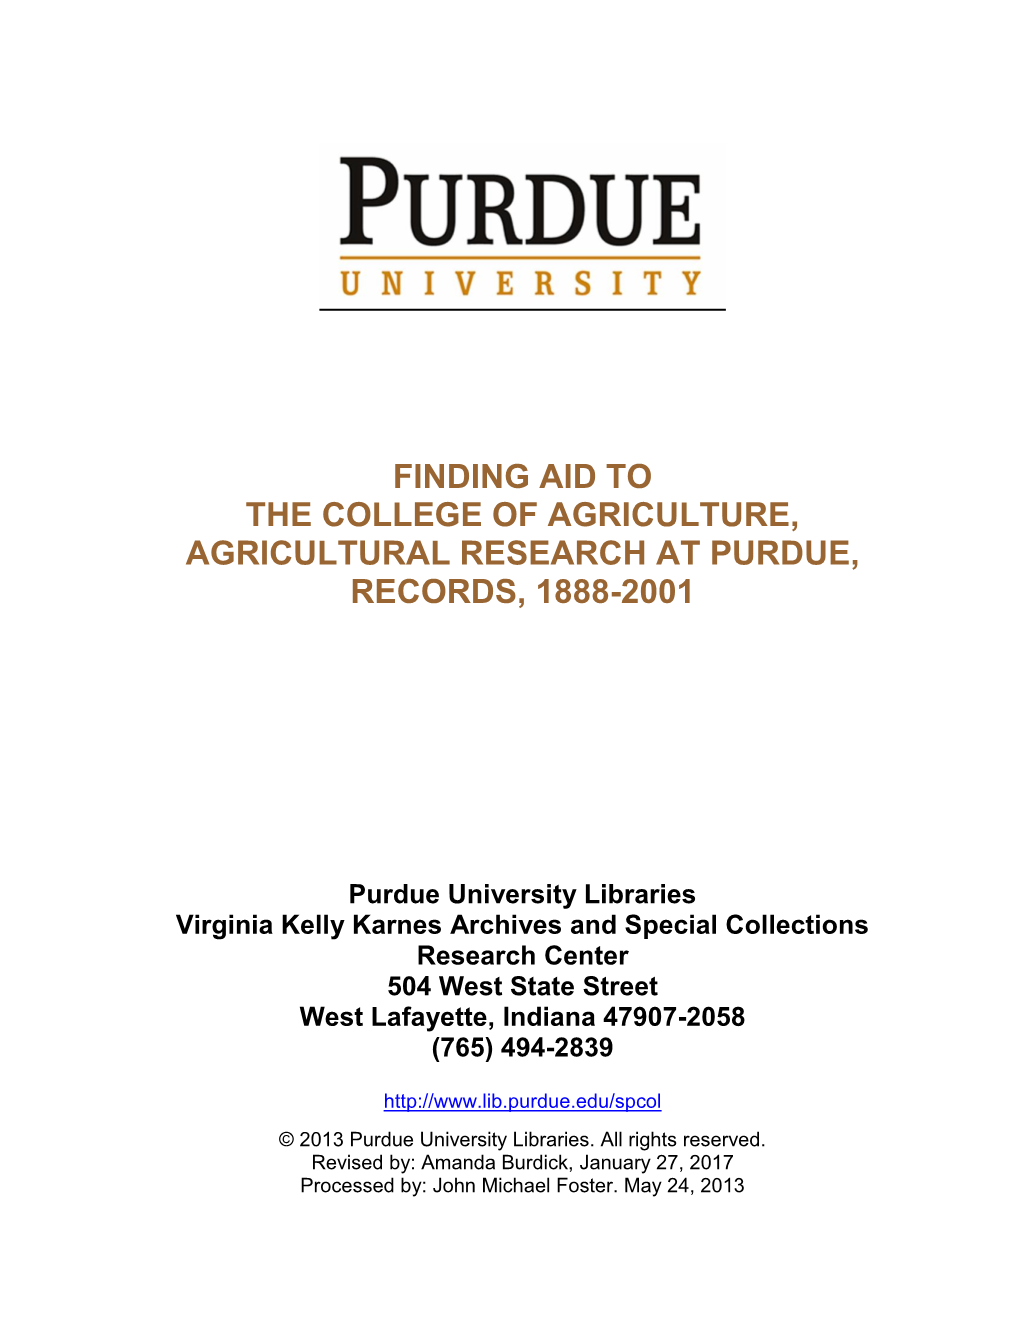 Finding Aid to the College of Agriculture, Agricultural Research at Purdue, Records, 1888-2001